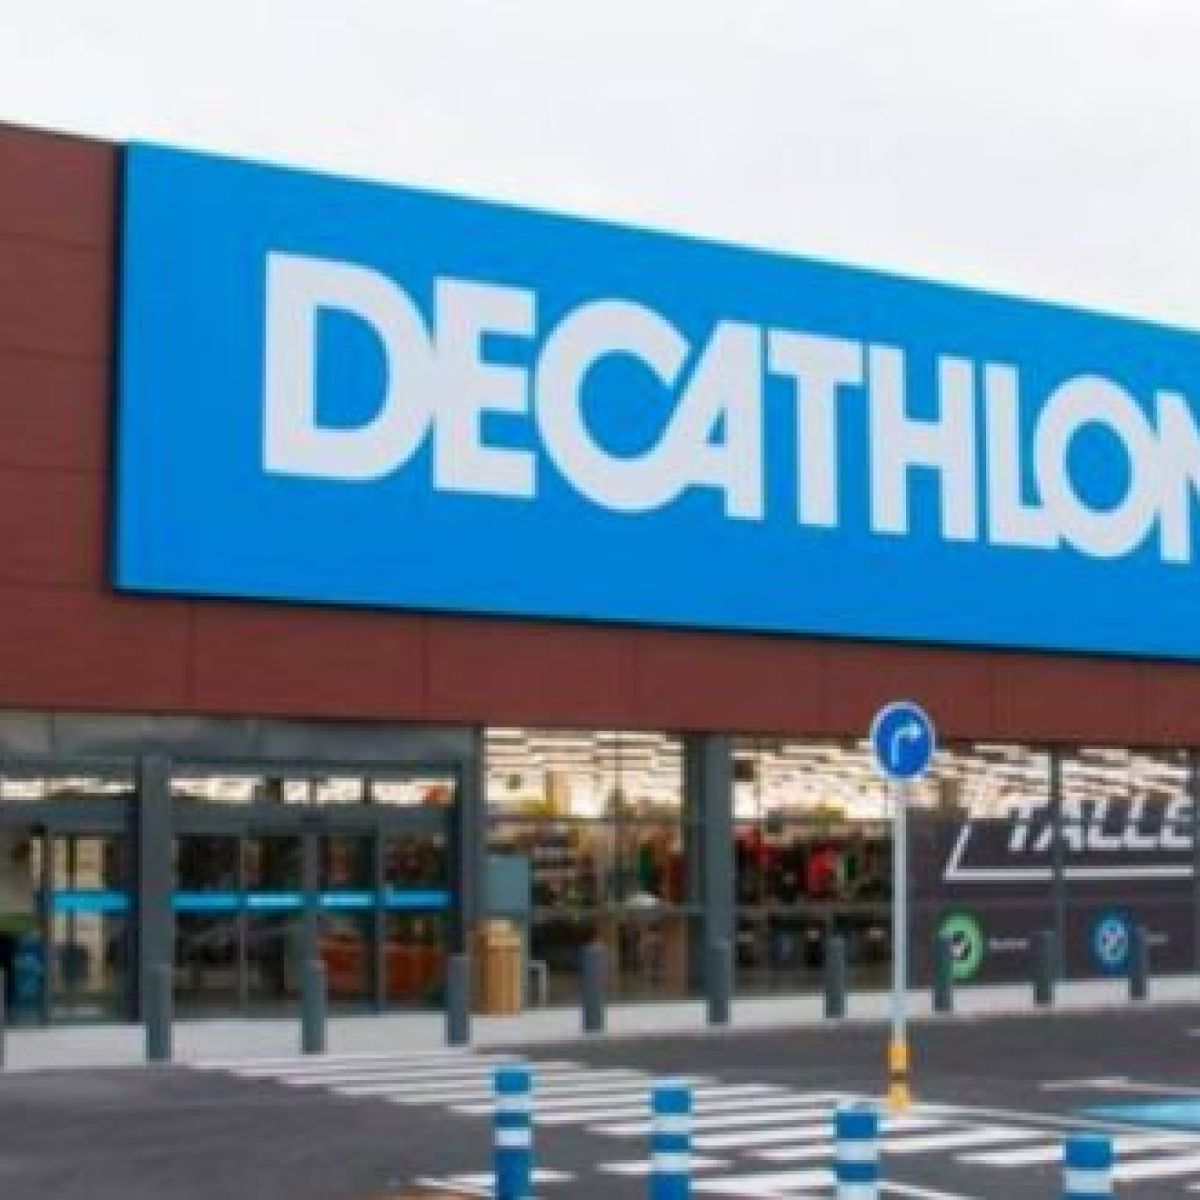 decathlon is from